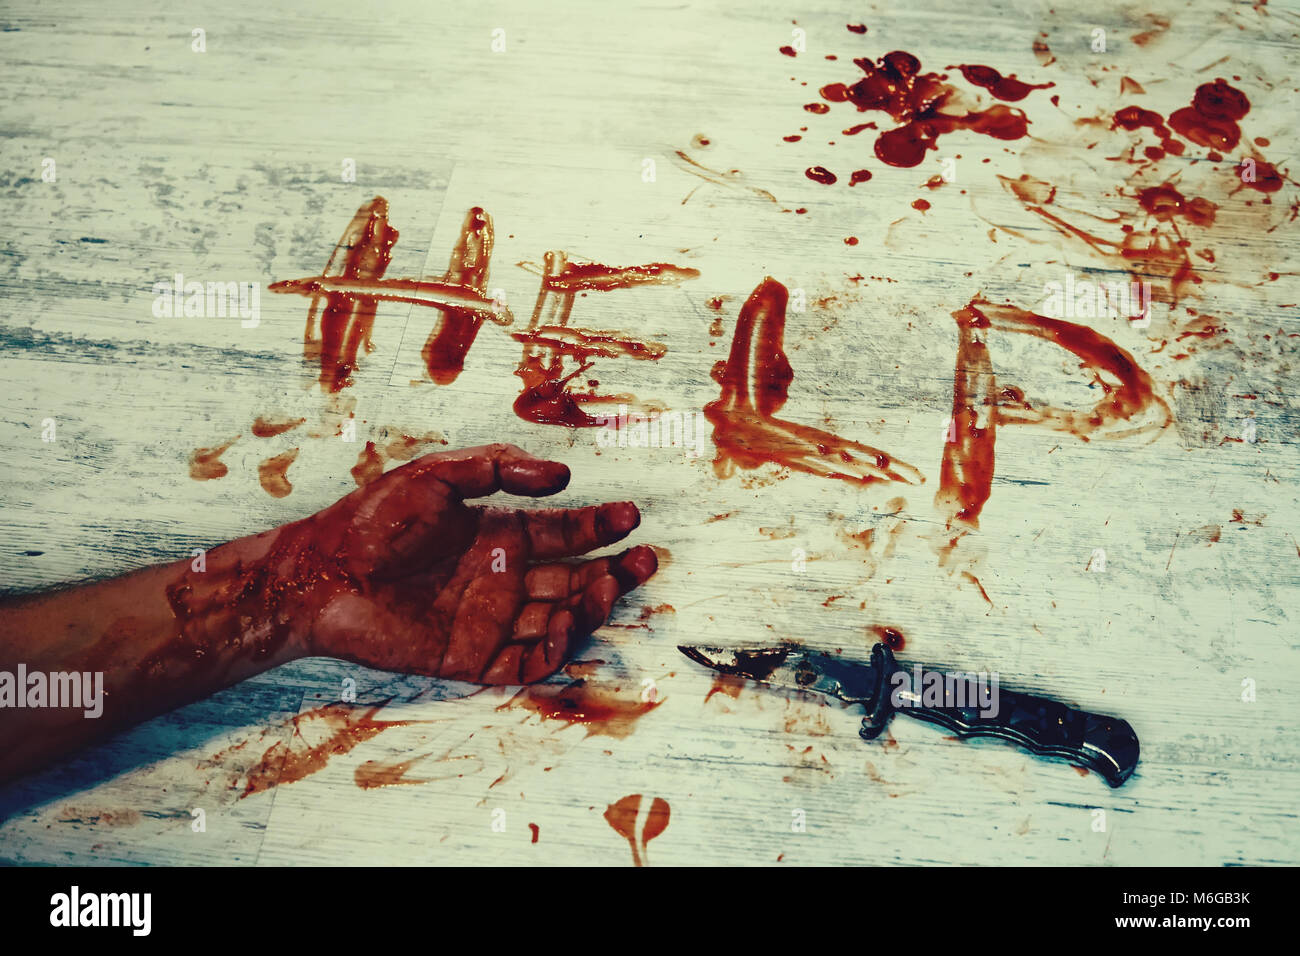 Says help, written in red blood on the dirty white floor of the bloody hand. The murder victim asks for help. Stock Photo